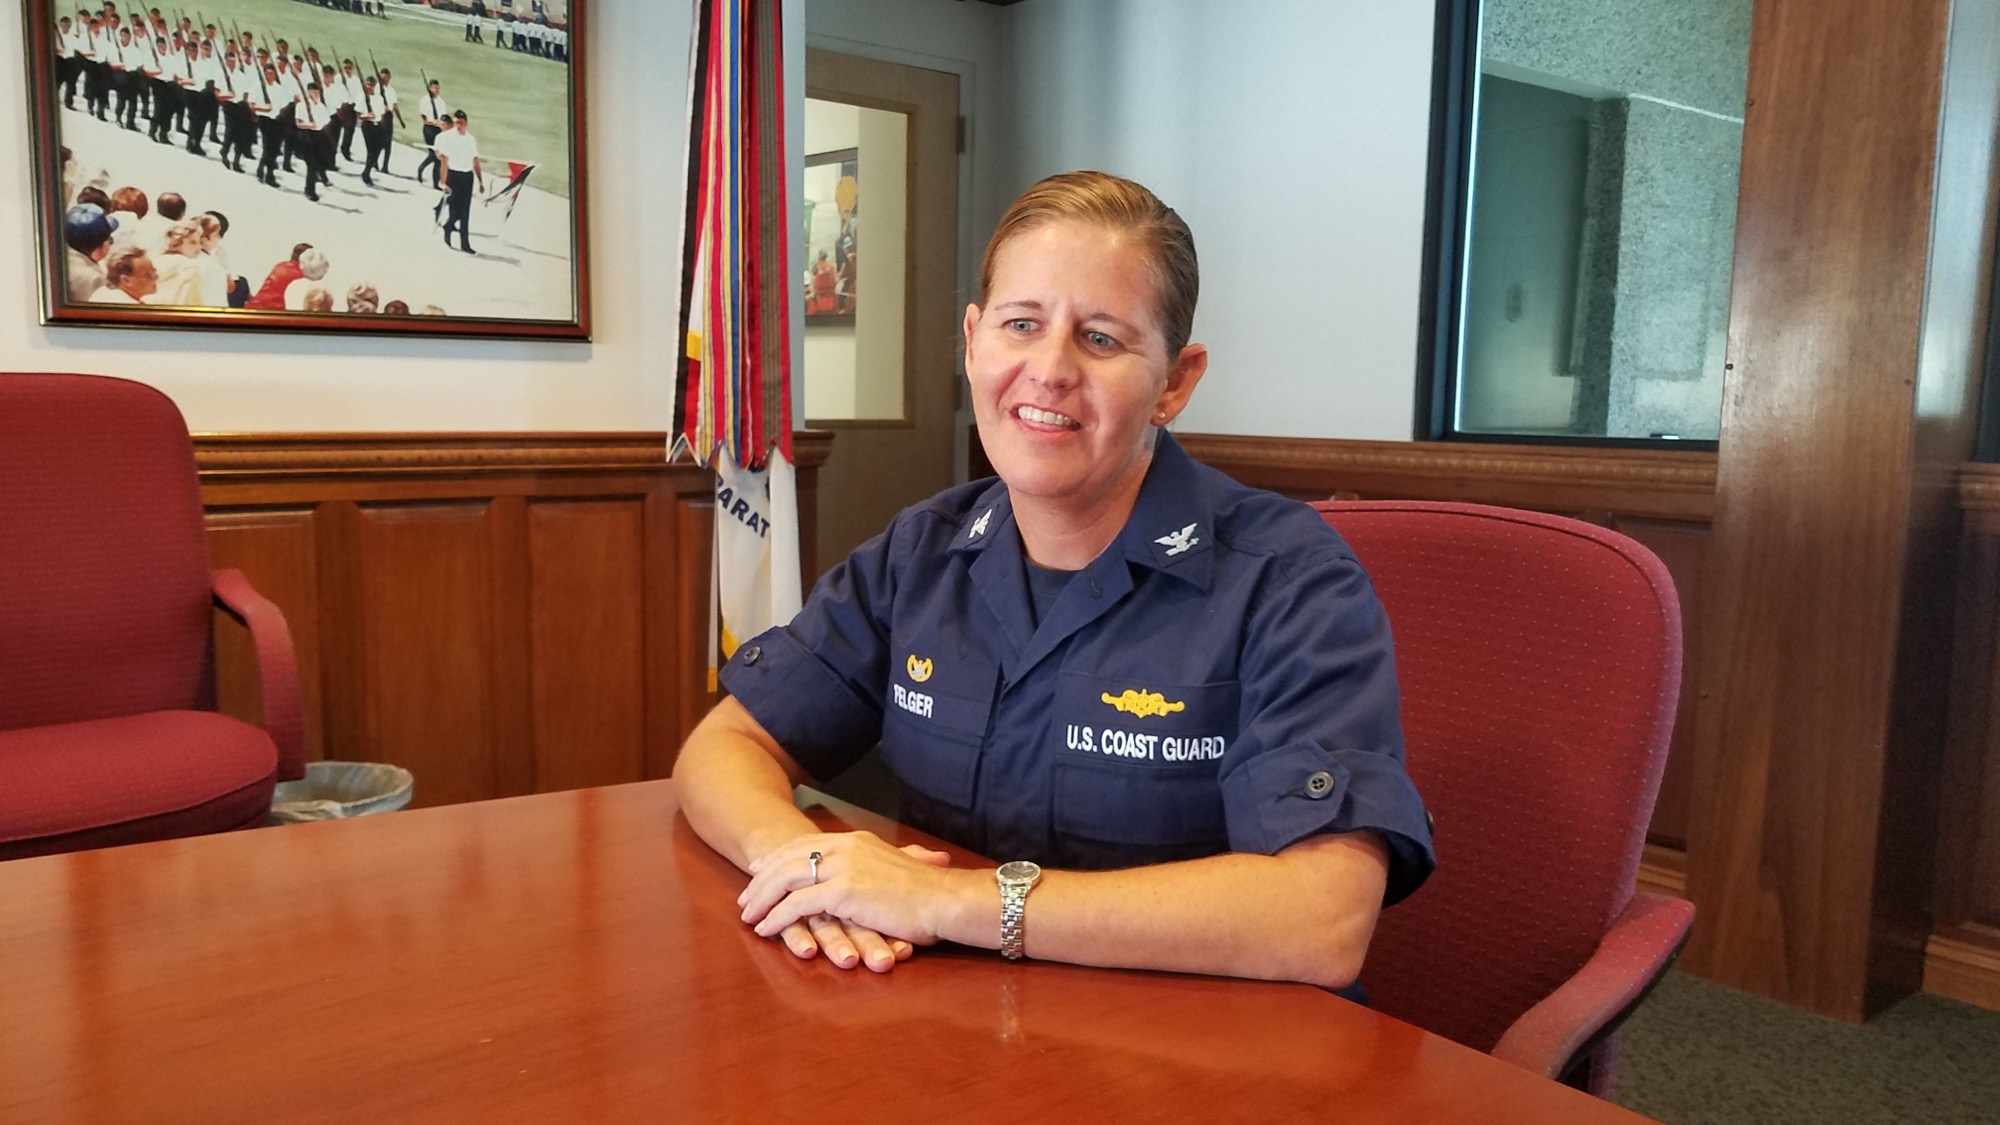 Capt. Sarah "Kathy" Felger is glad to be returning to Cape May